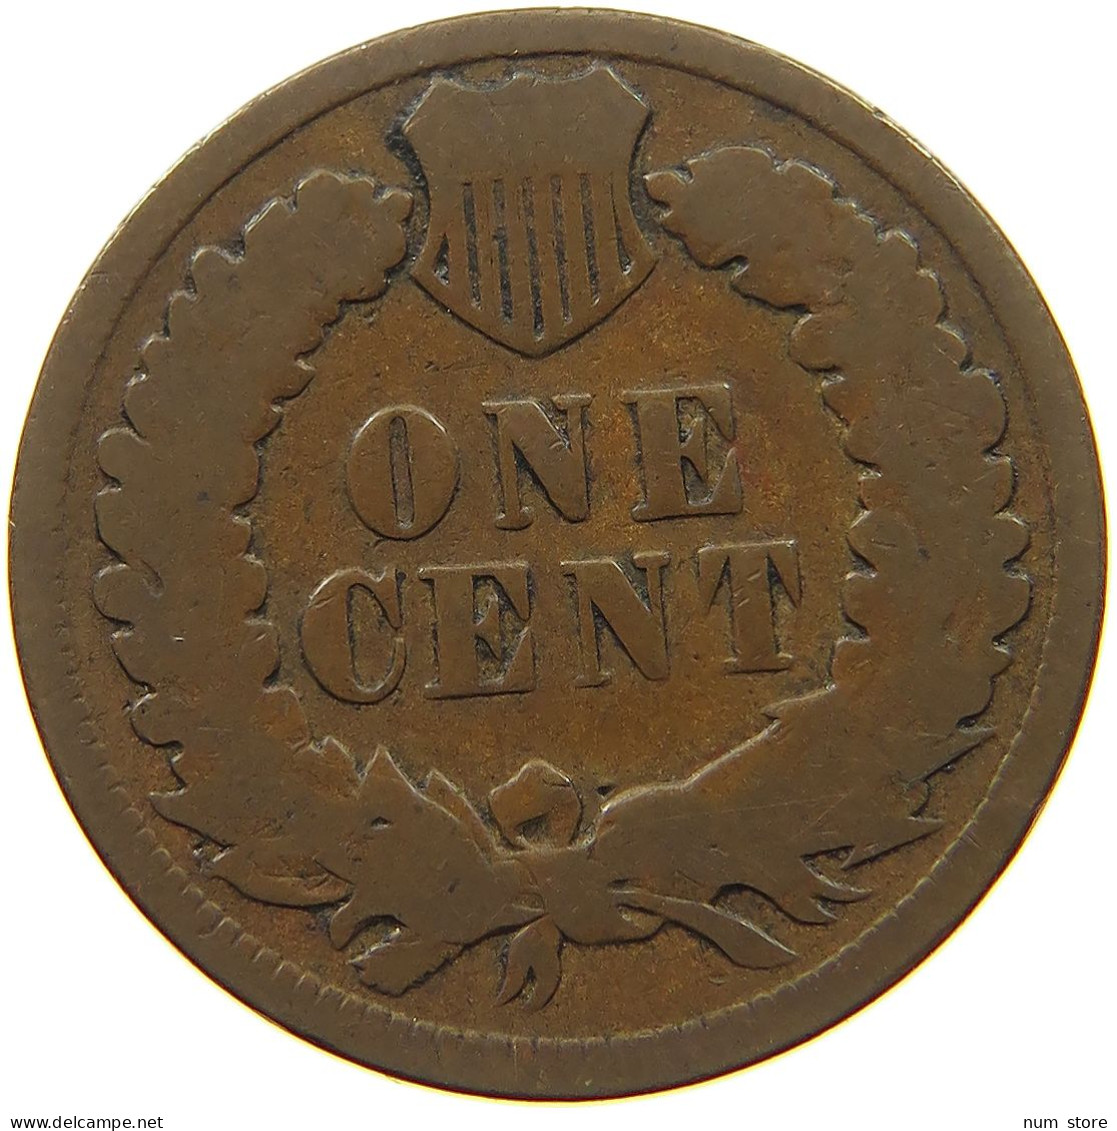 UNITED STATES OF AMERICA CENT 1888 INDIAN HEAD #s045 0407 - 1859-1909: Indian Head